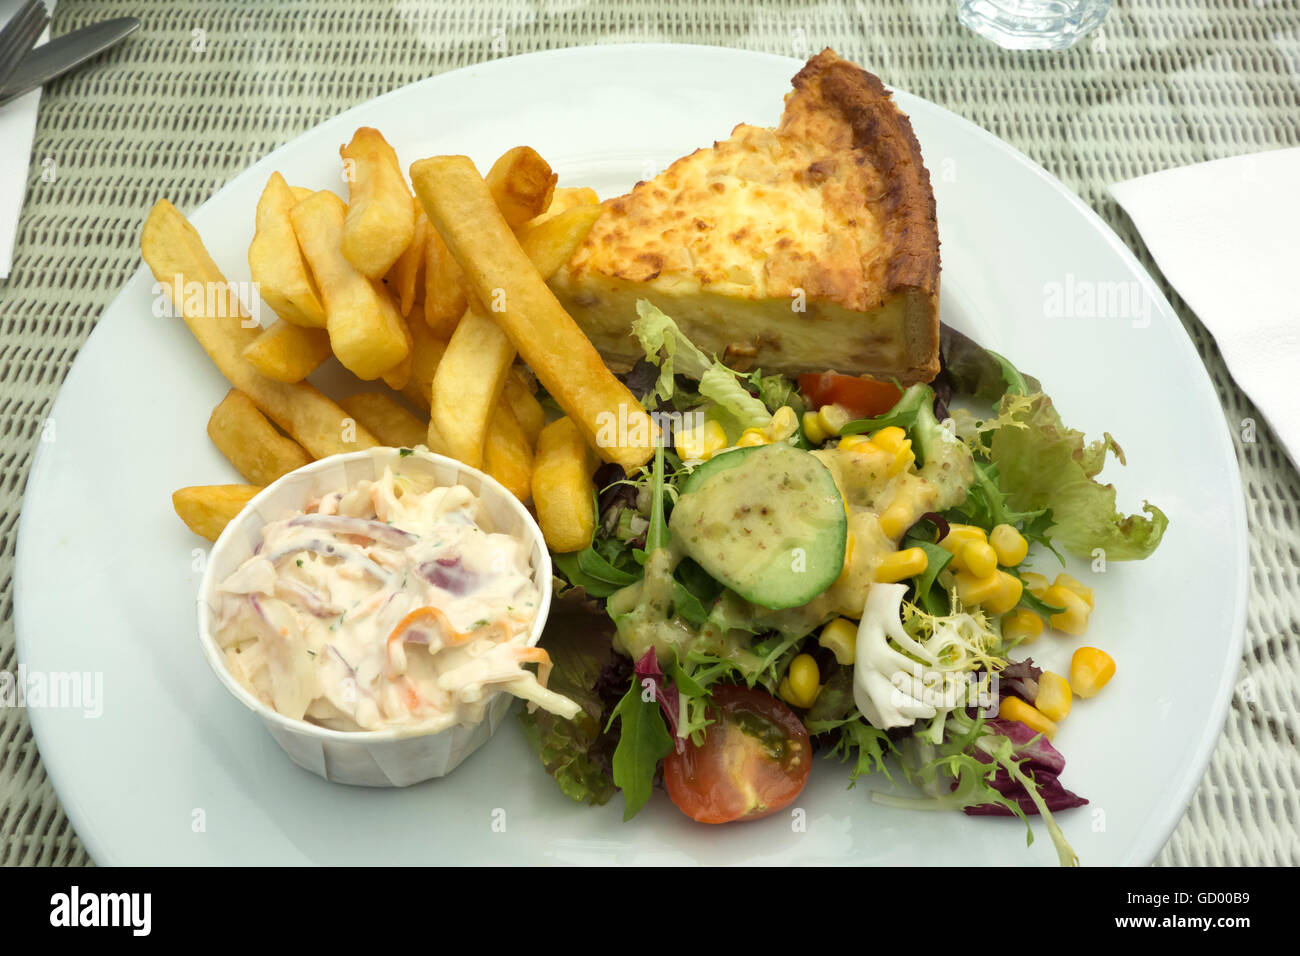 Quiche and chips with salad and coleslaw meal Stock Photo